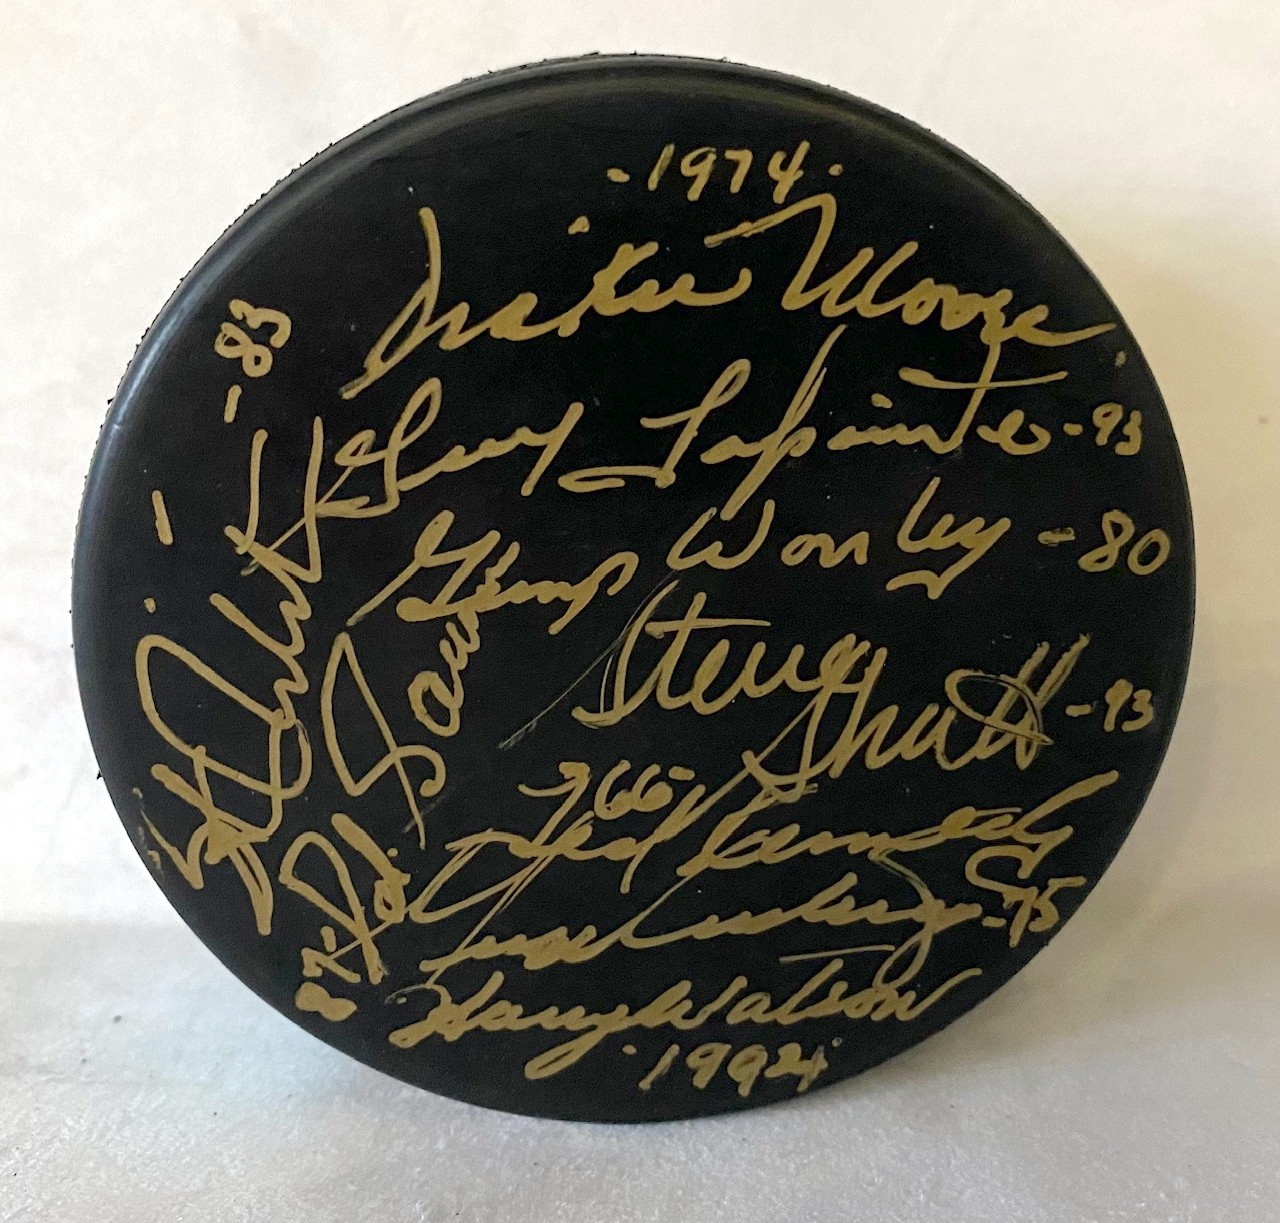 Hockey Hall of Fame Puck Signed by 9 including George Armstrong & Stan Mikita